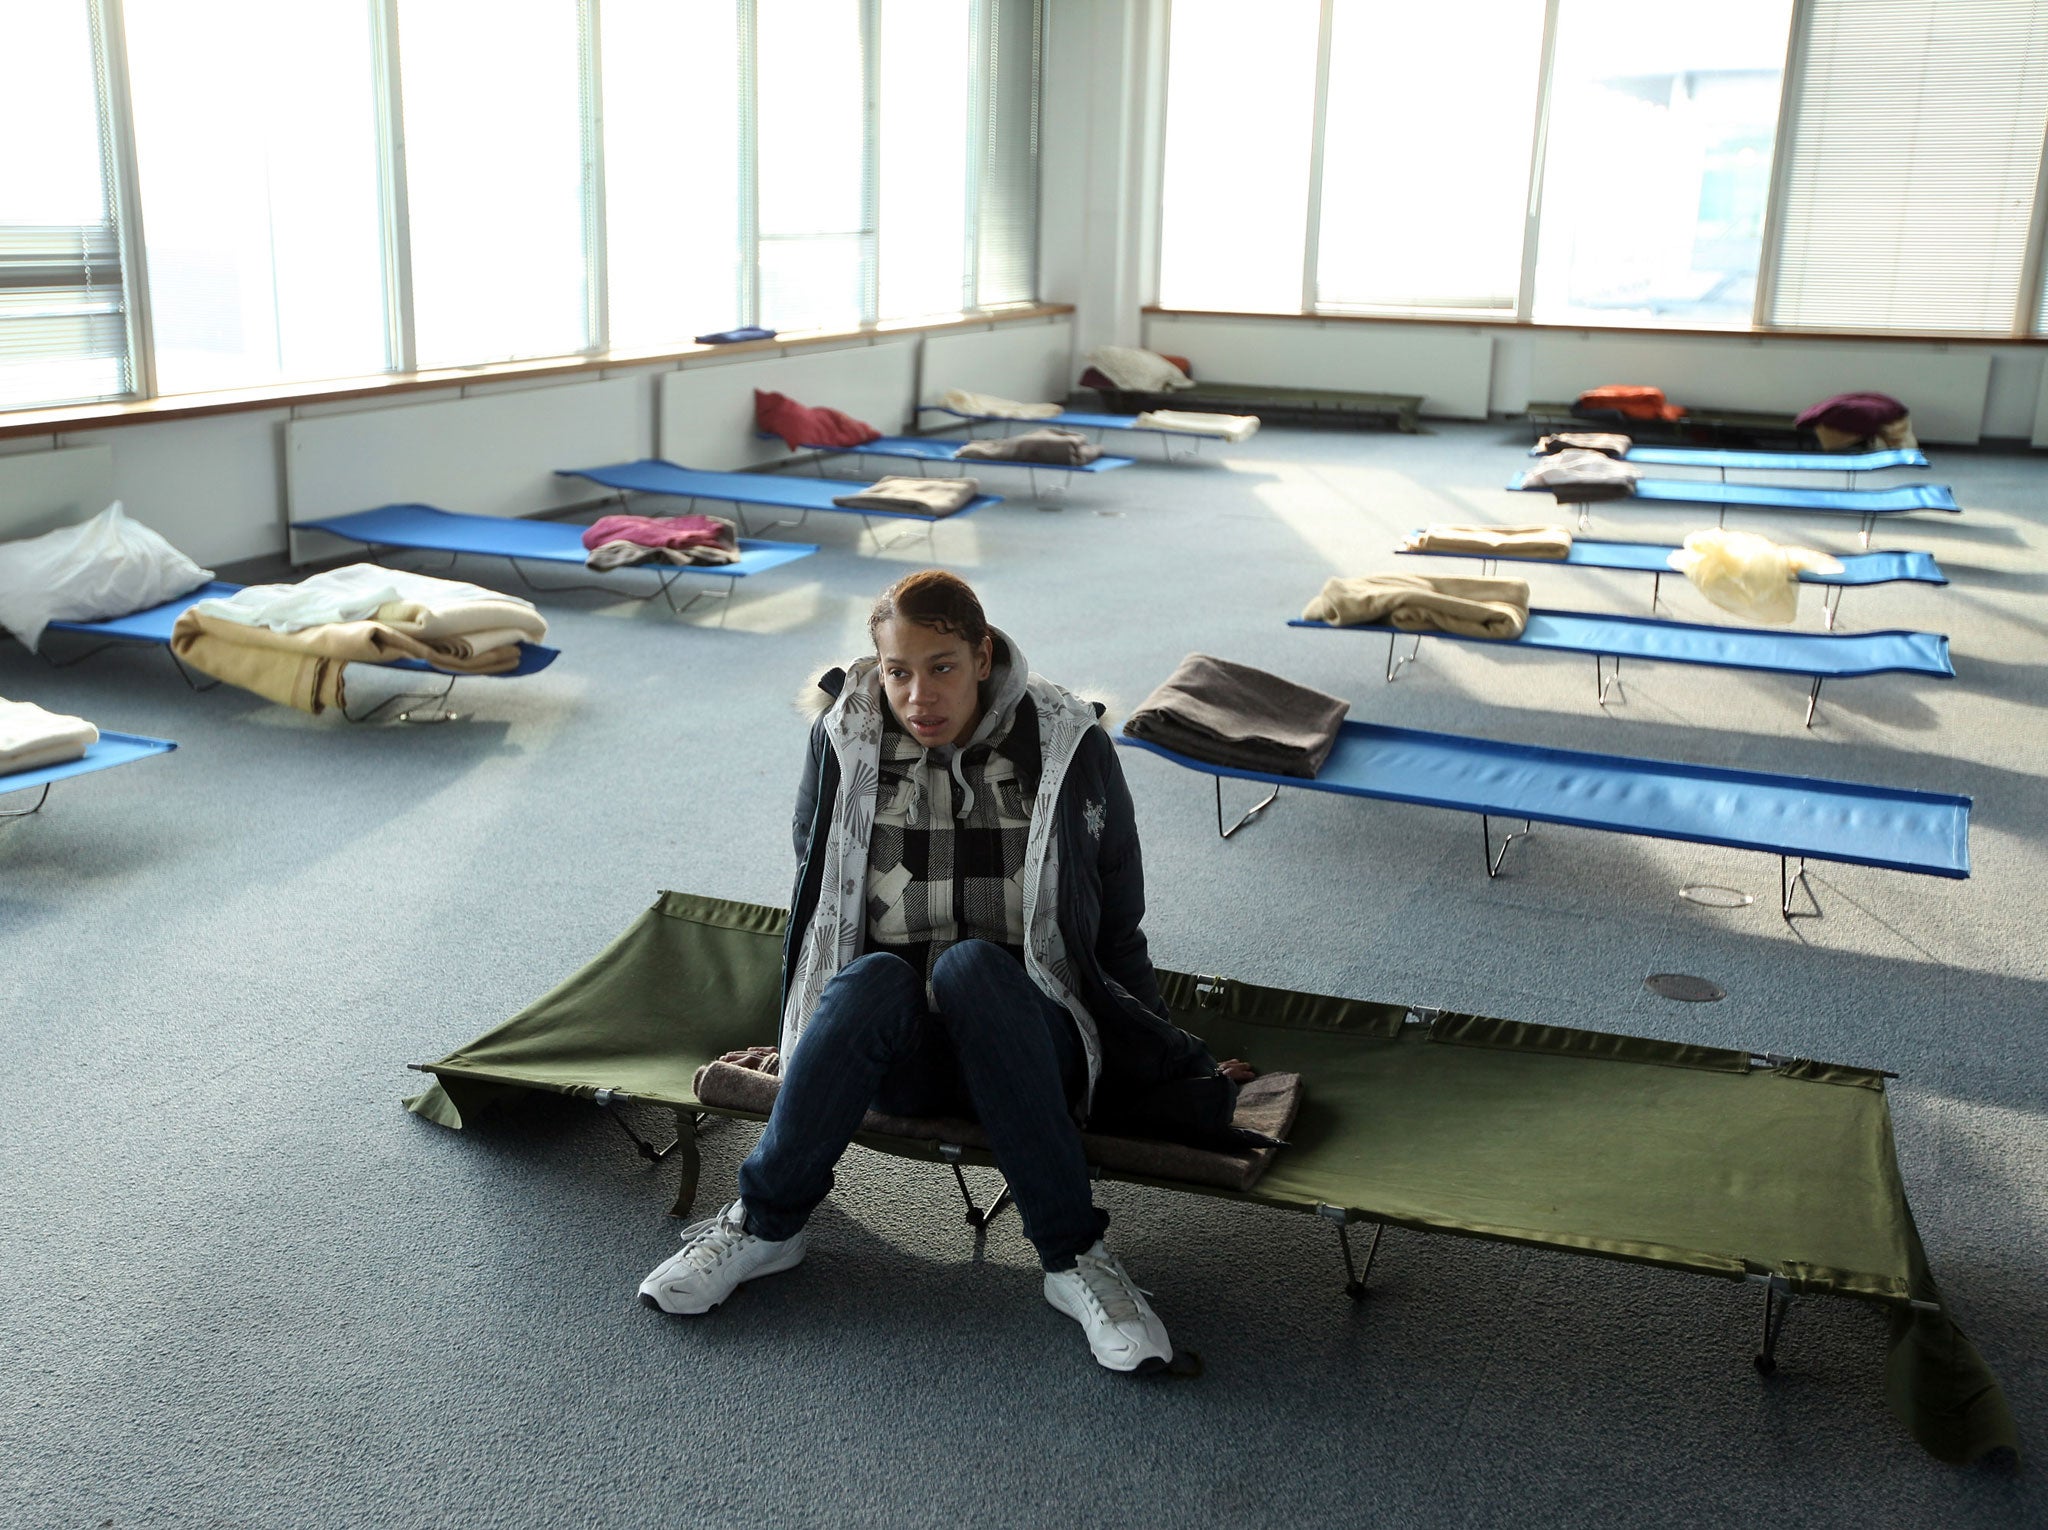 Susan, a homeless woman from London rests on a camp-bed in the dormitory of a Christmas homeless shelter set up by the charity 'Crisis' on December 23, 2009 in London, England.